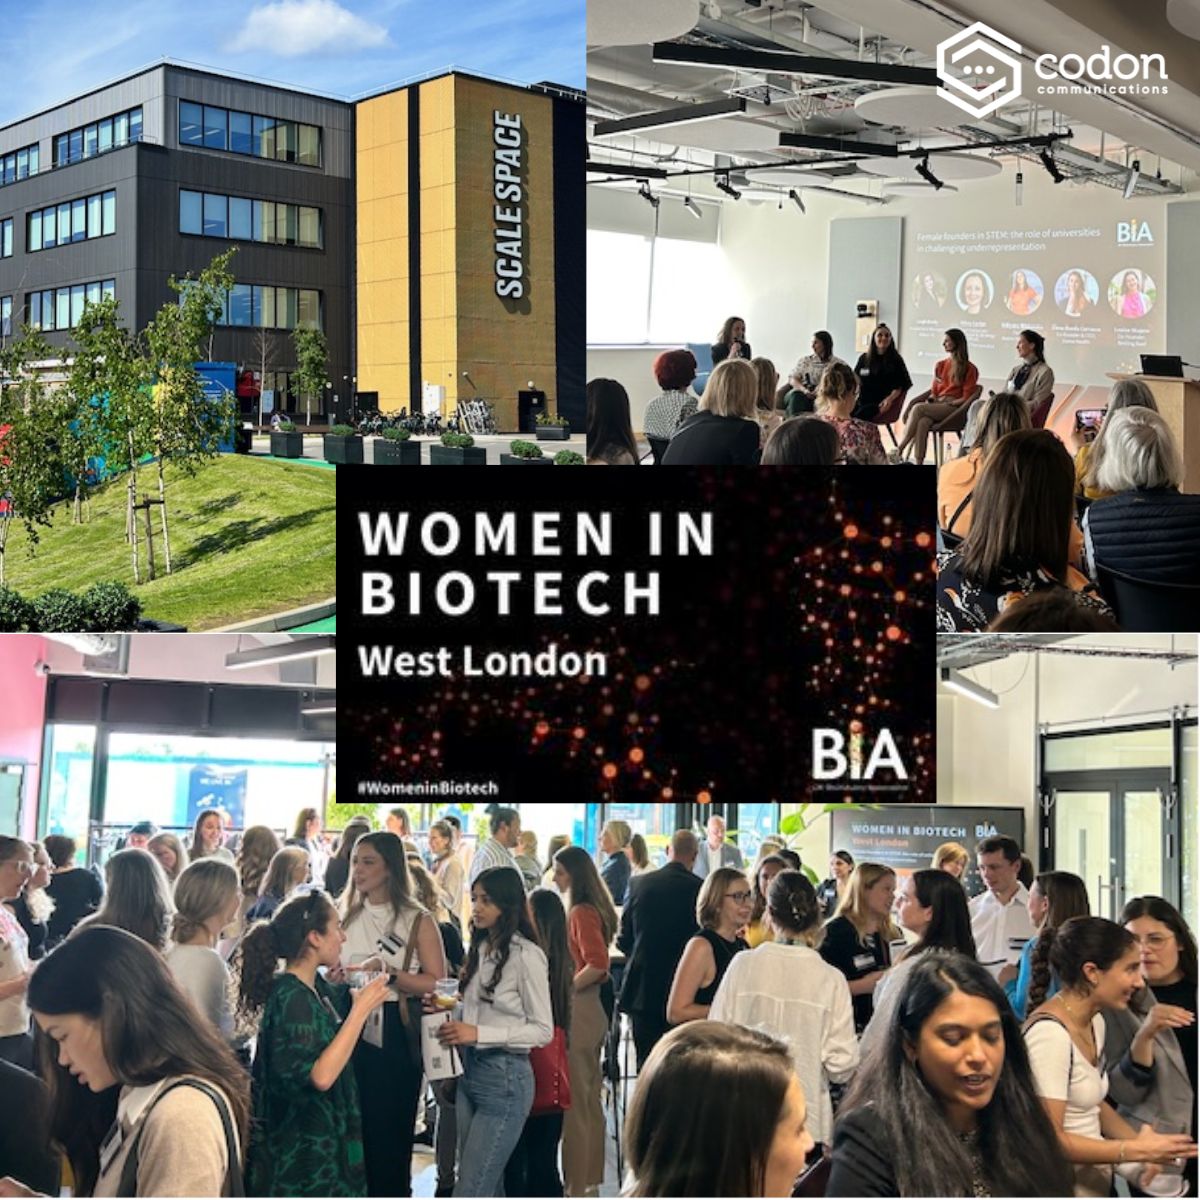 What a remarkable panel of #FemaleFounders in #STEM at the @BIA_UK #WomeninBiotech — West London @scale_space yesterday! Thank you for sharing your inspirational stories 🌟

#womeninscience #biotech #medtech #messengersinscience